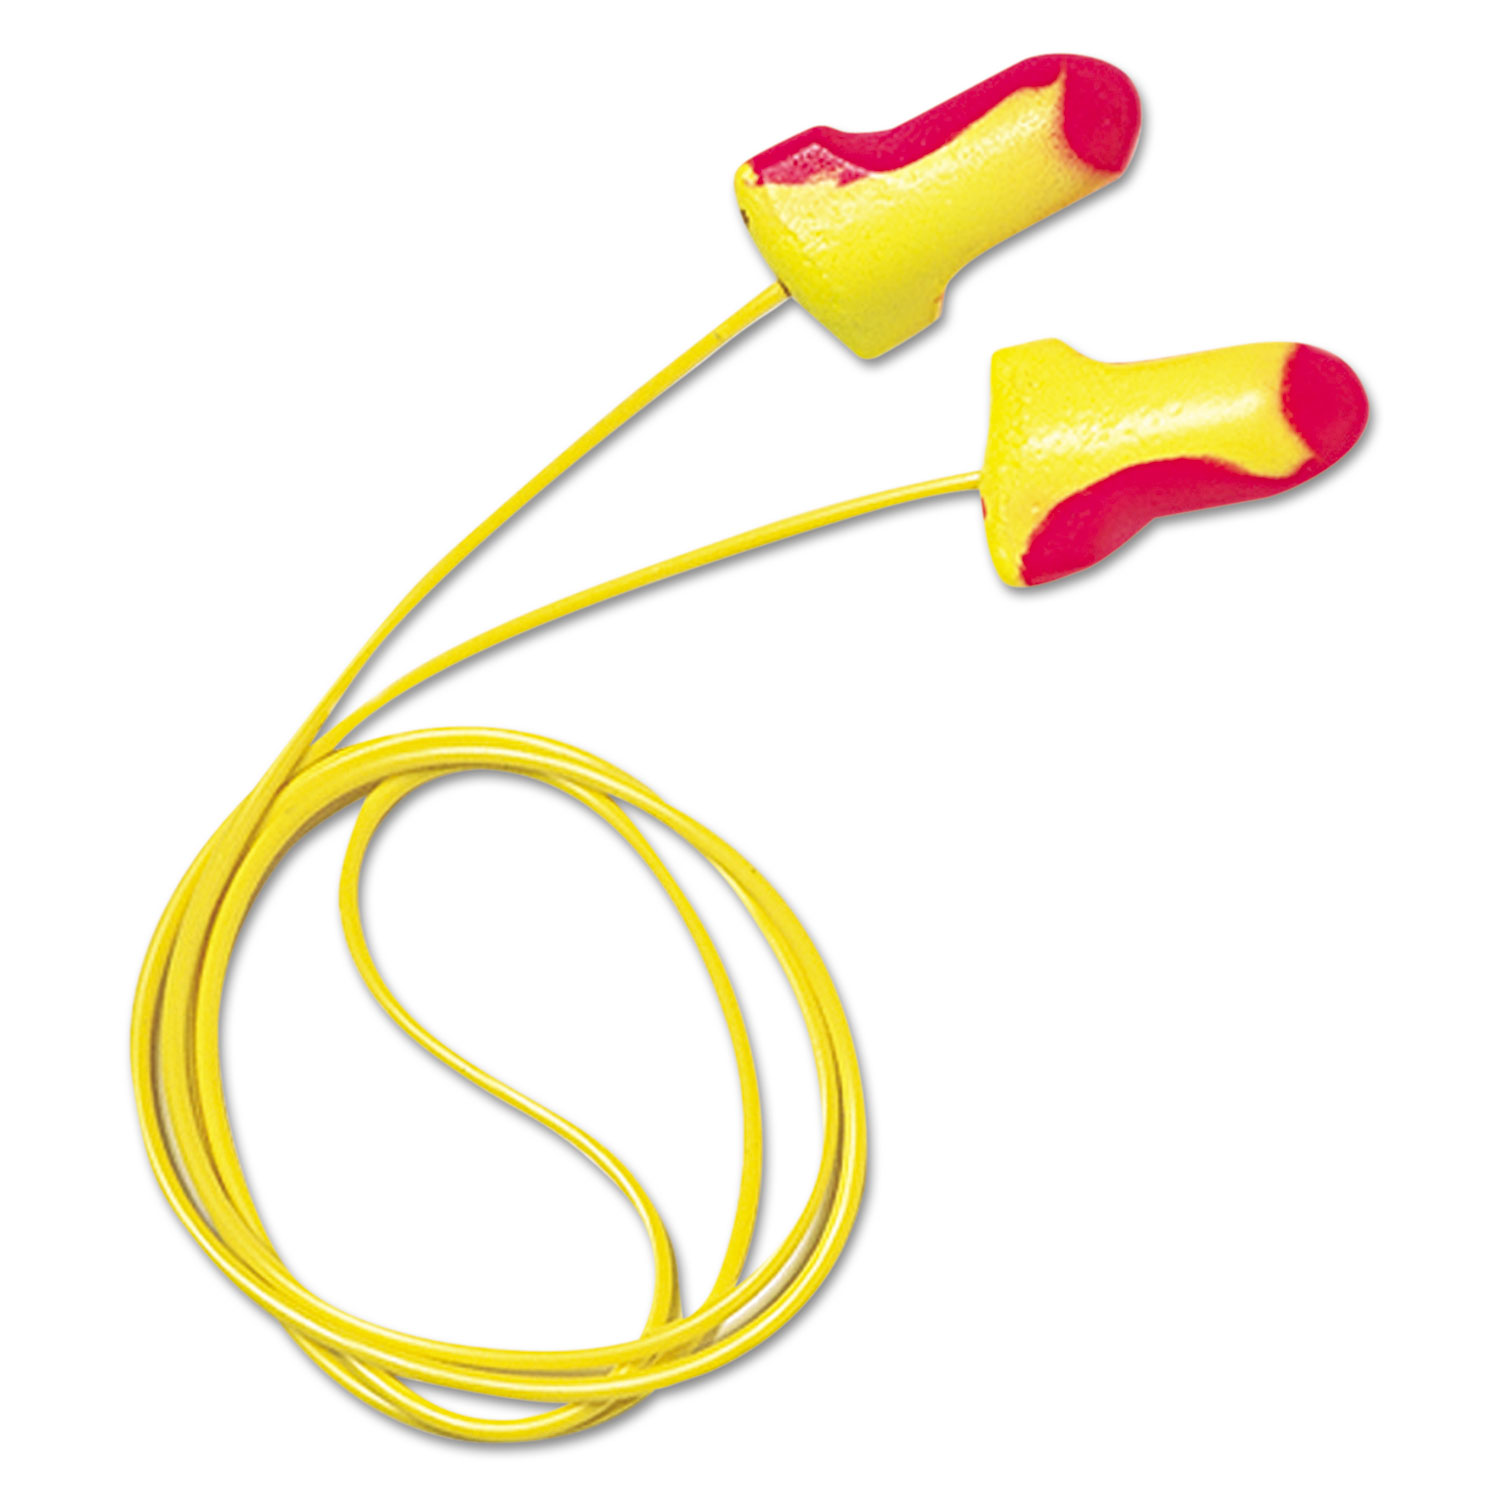  Howard Leight by Honeywell LL-30 LL-30 Laser Lite Single-Use Earplugs, Corded, 32NRR, Magenta/Yellow, 100 Pairs (HOWLL30) 